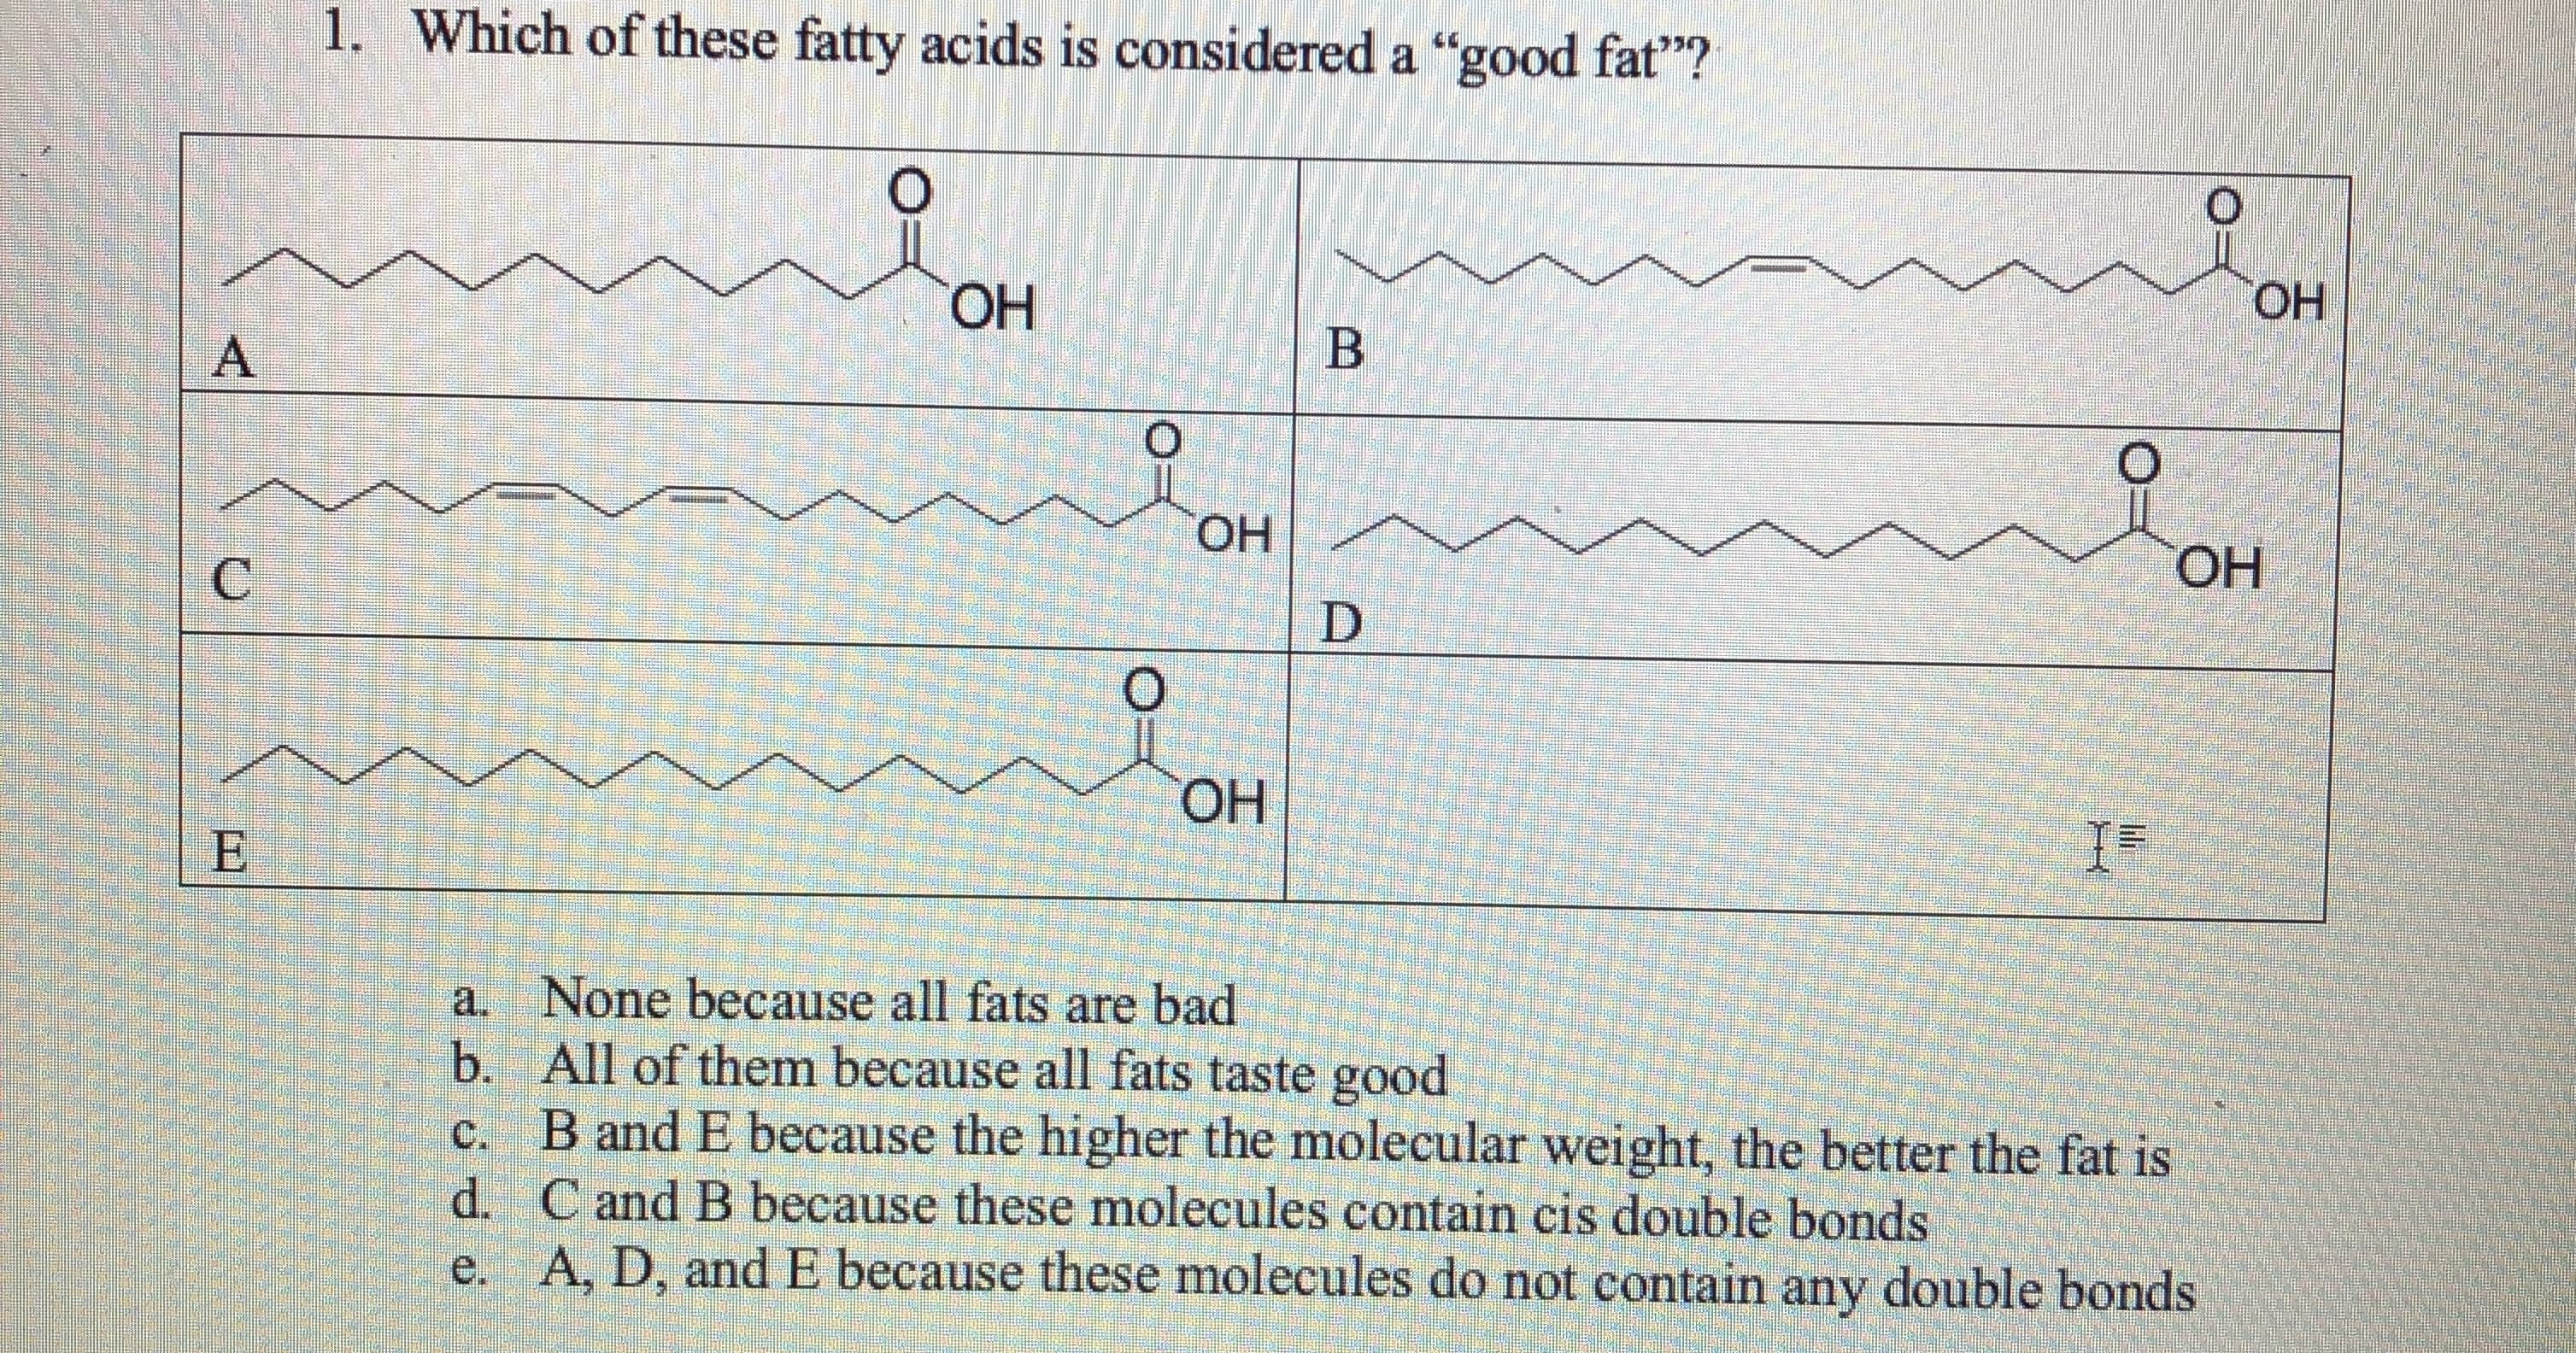 1. Which of these fatty acids is considered a "good fat"?
ОН
ОН
A
Он
ОН
HO.
a. None because all fats are bad
b. All of them because all fats taste good
B and E because the higher the molecular weight, the better the fat is
d. C and B because these molecules contain cis double bonds
e. A, D, andE because these molecules do not contain any double bonds
C.
